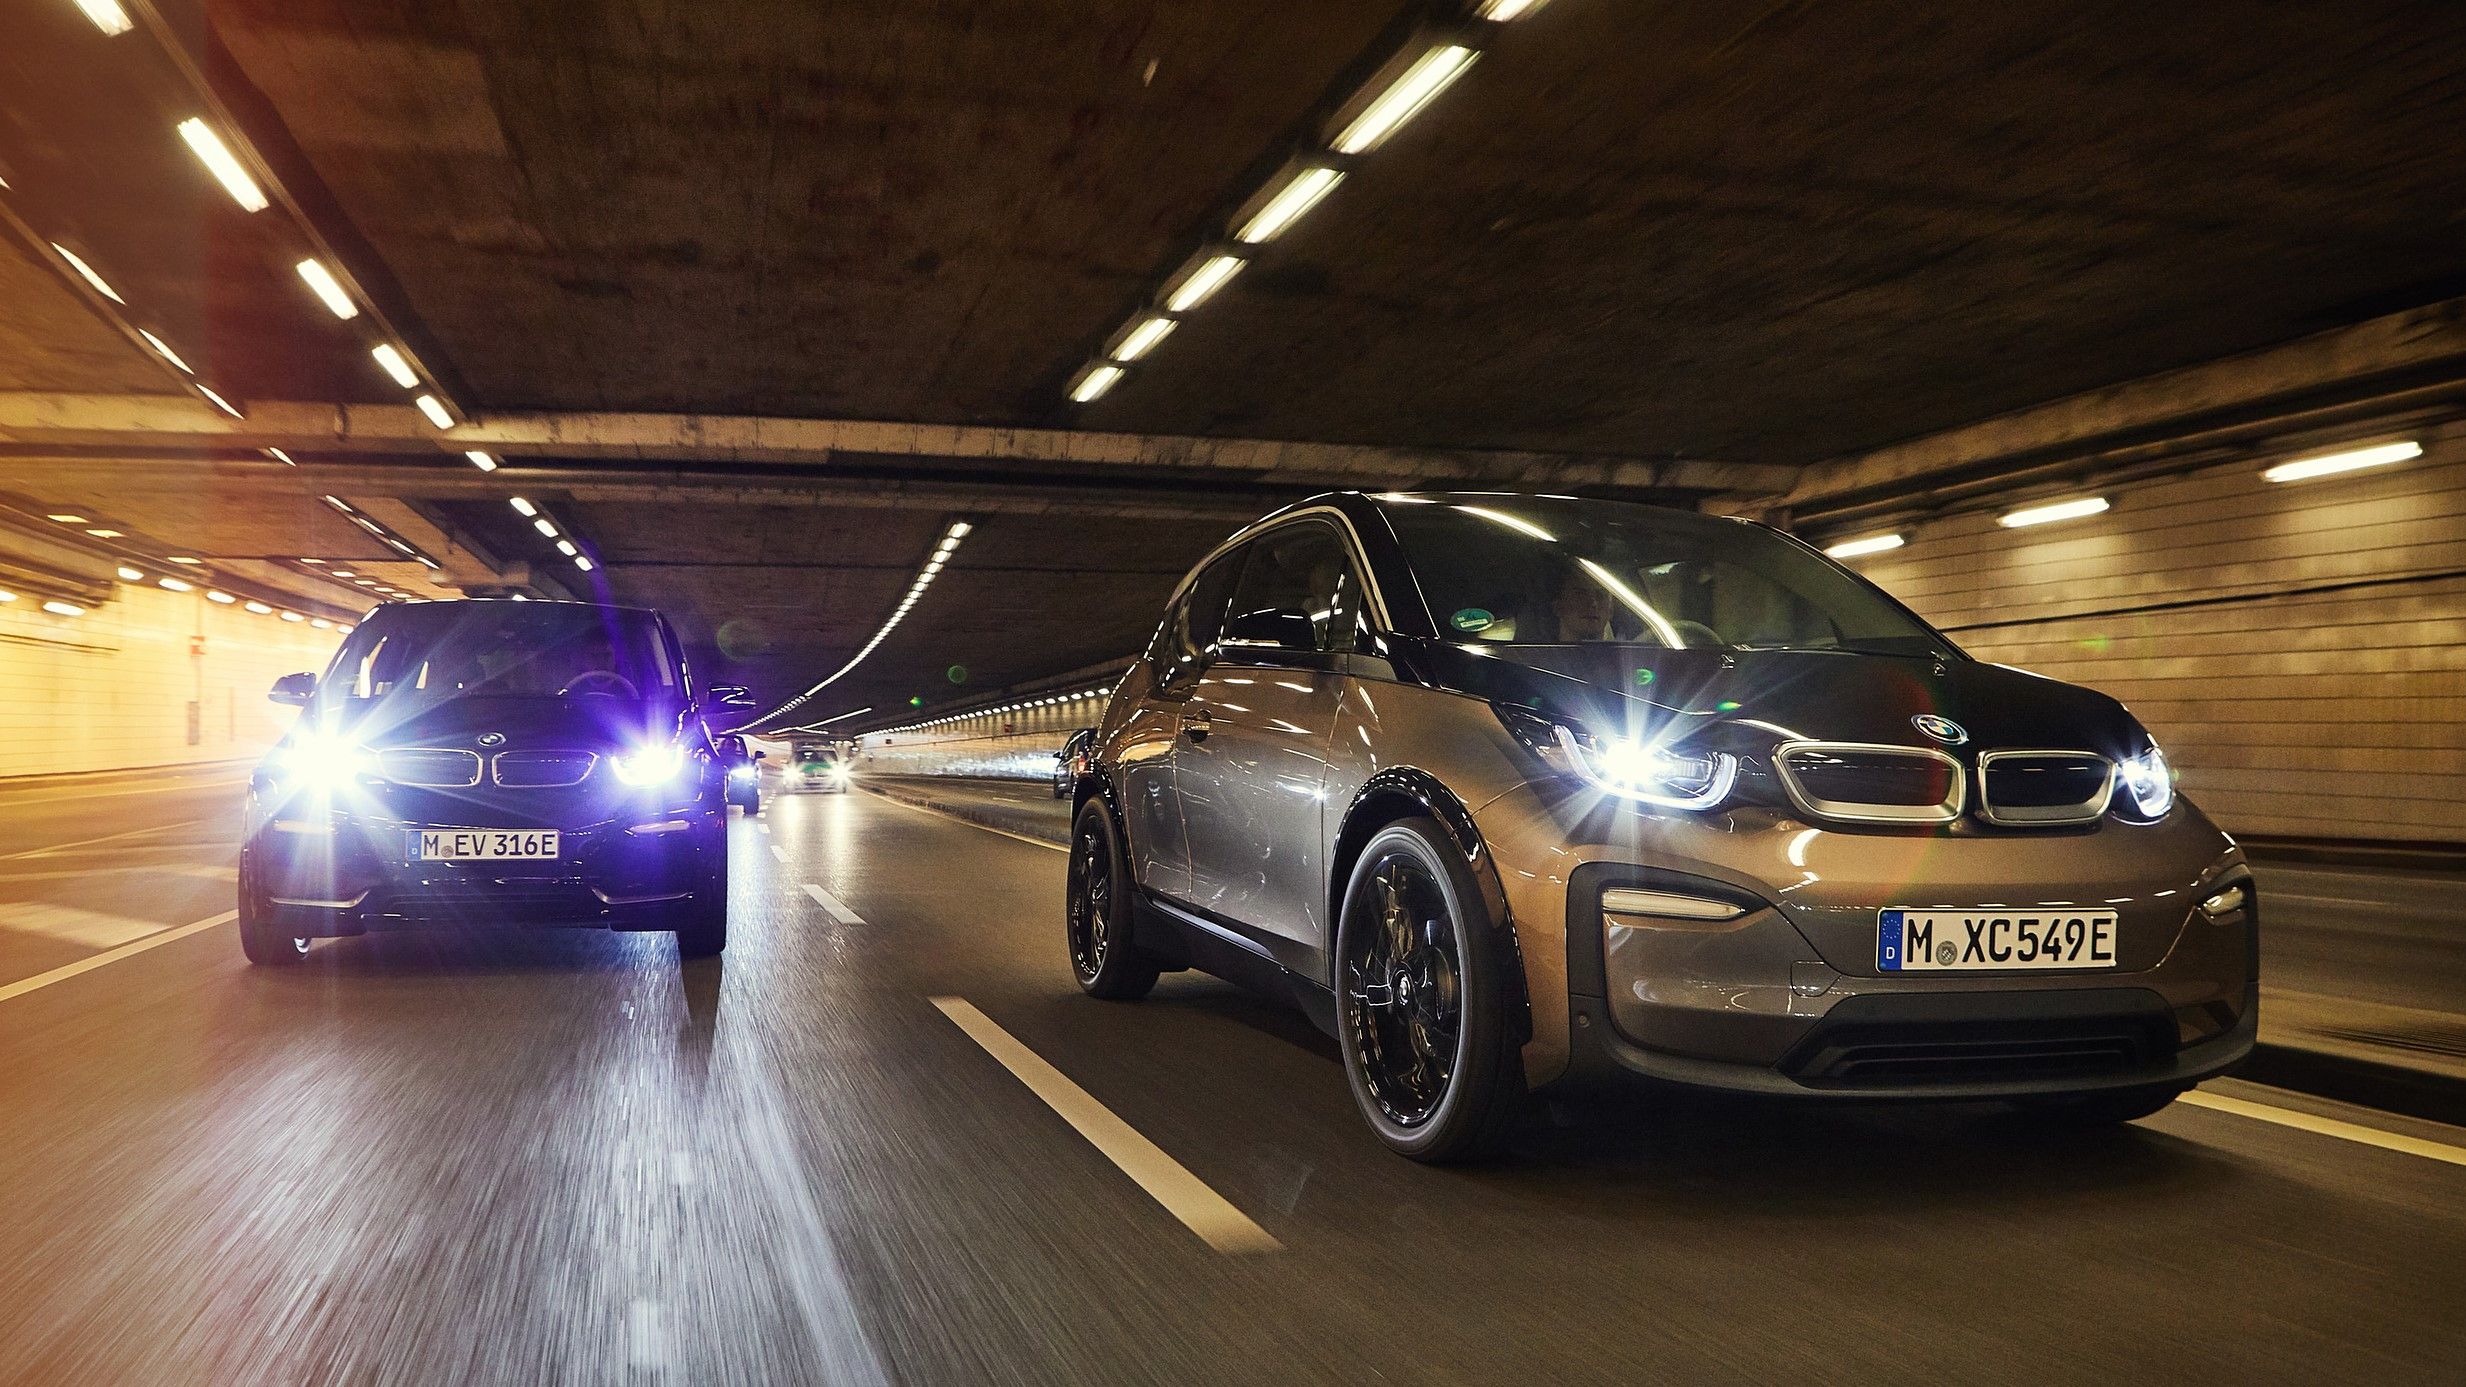 BMW i3 line-up front view in tunnel